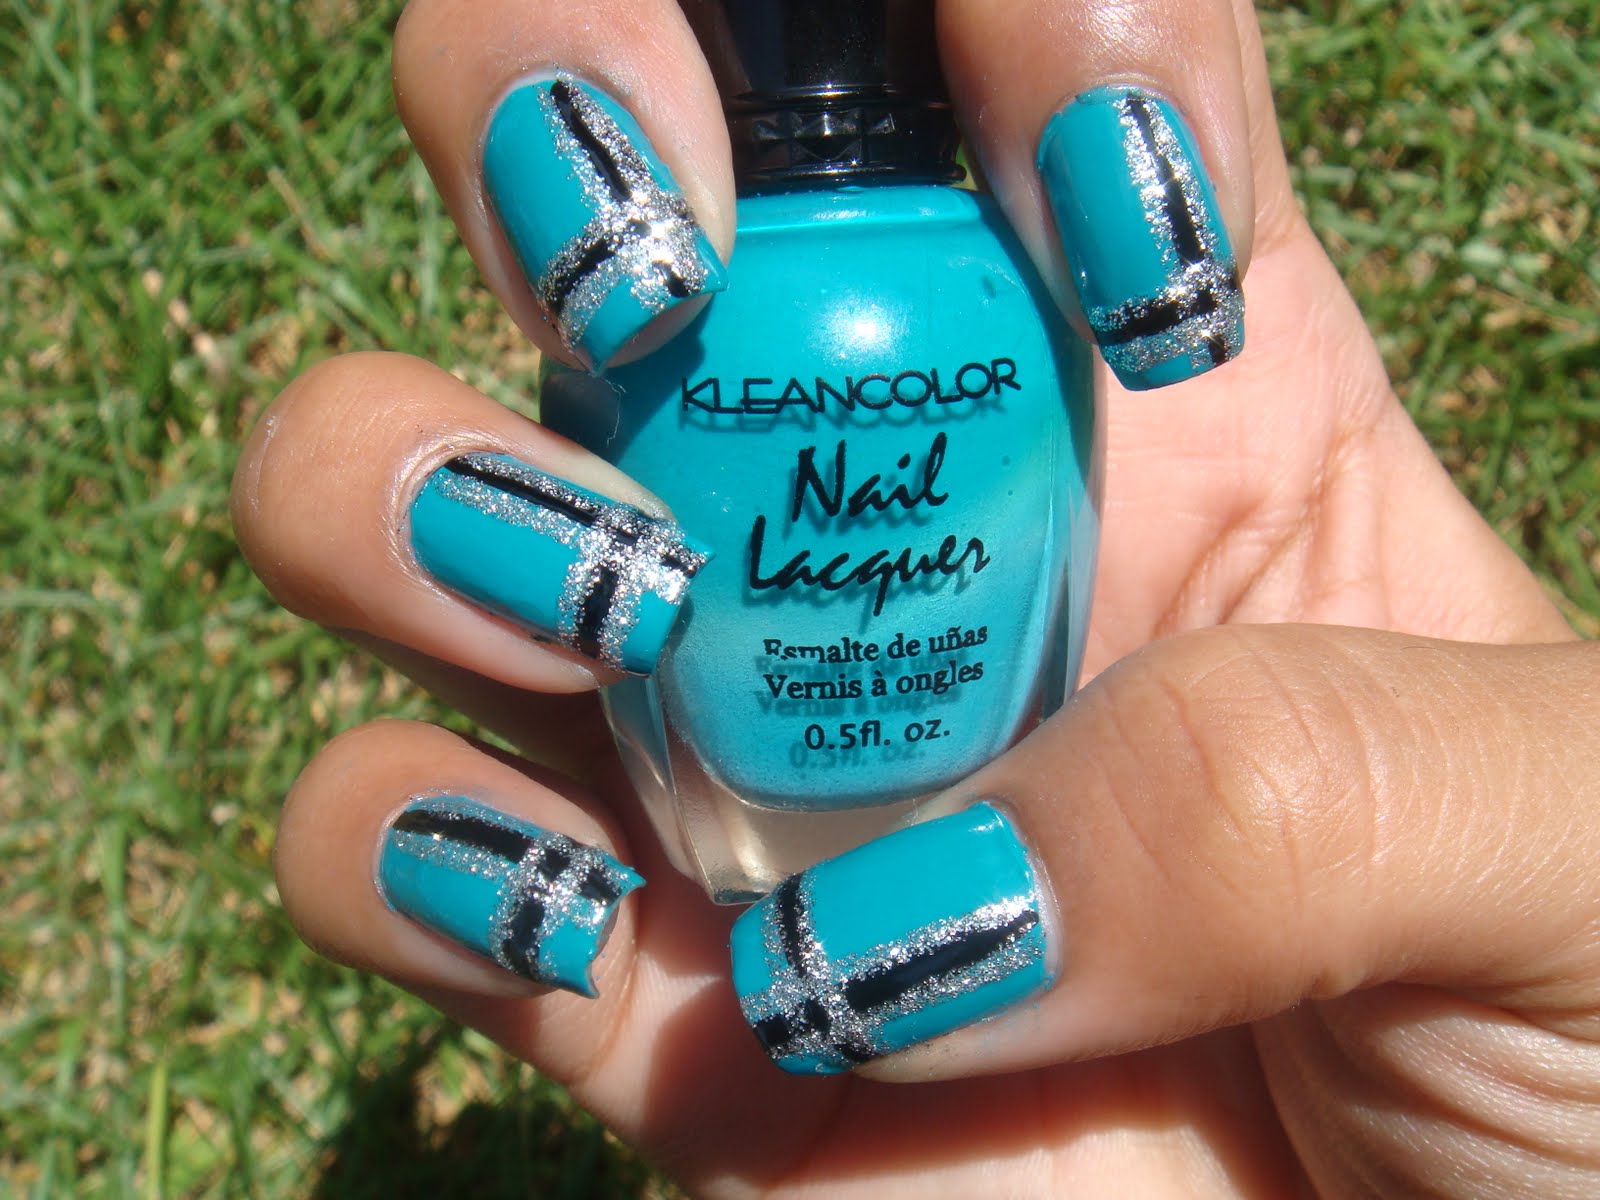 2. "Tranquil Teal" Nail Polish - wide 3